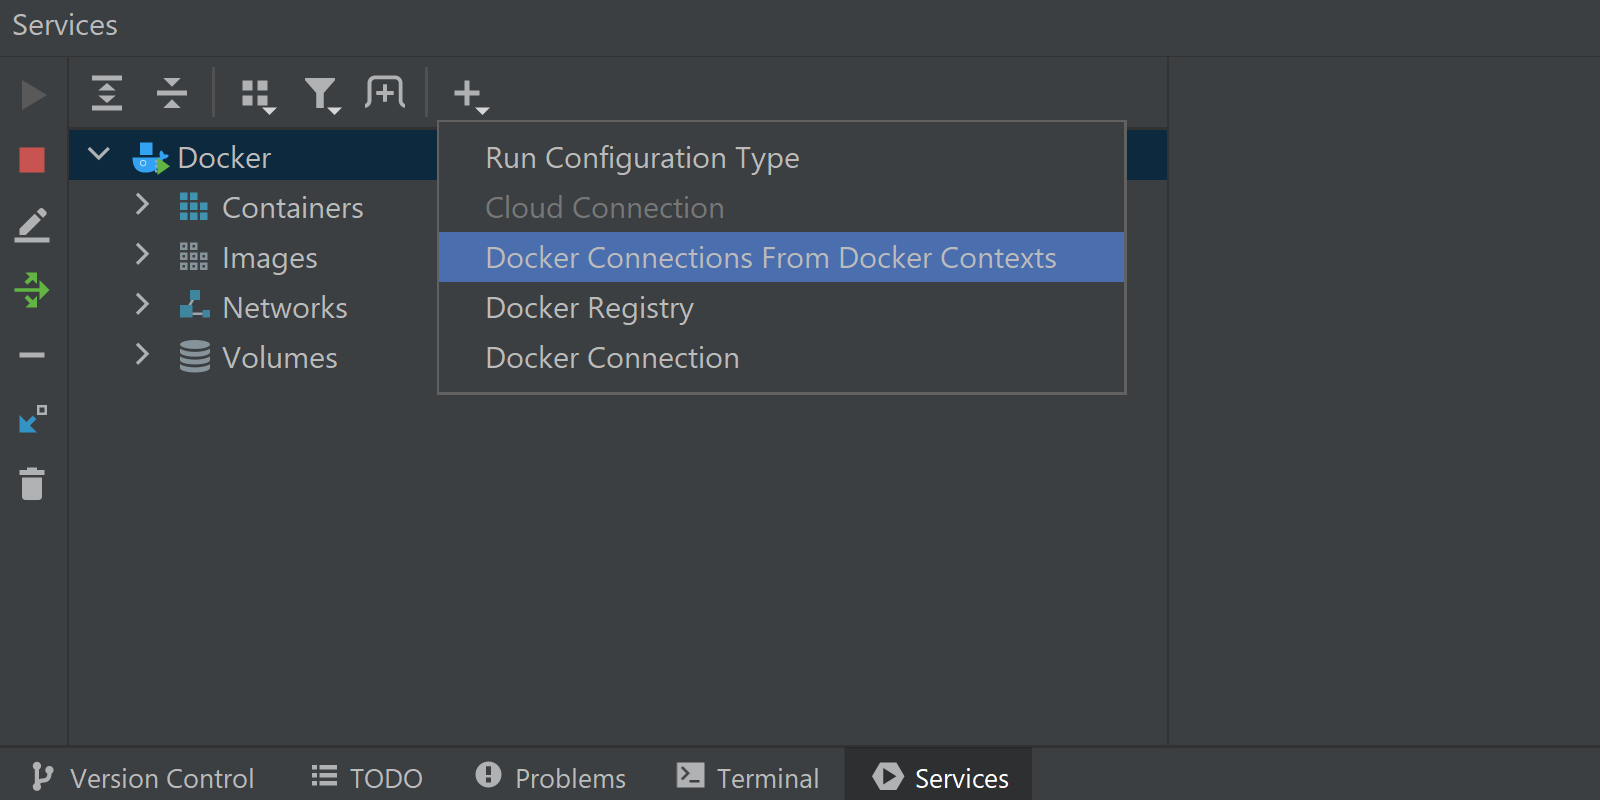 Docker connections from Docker Contexts